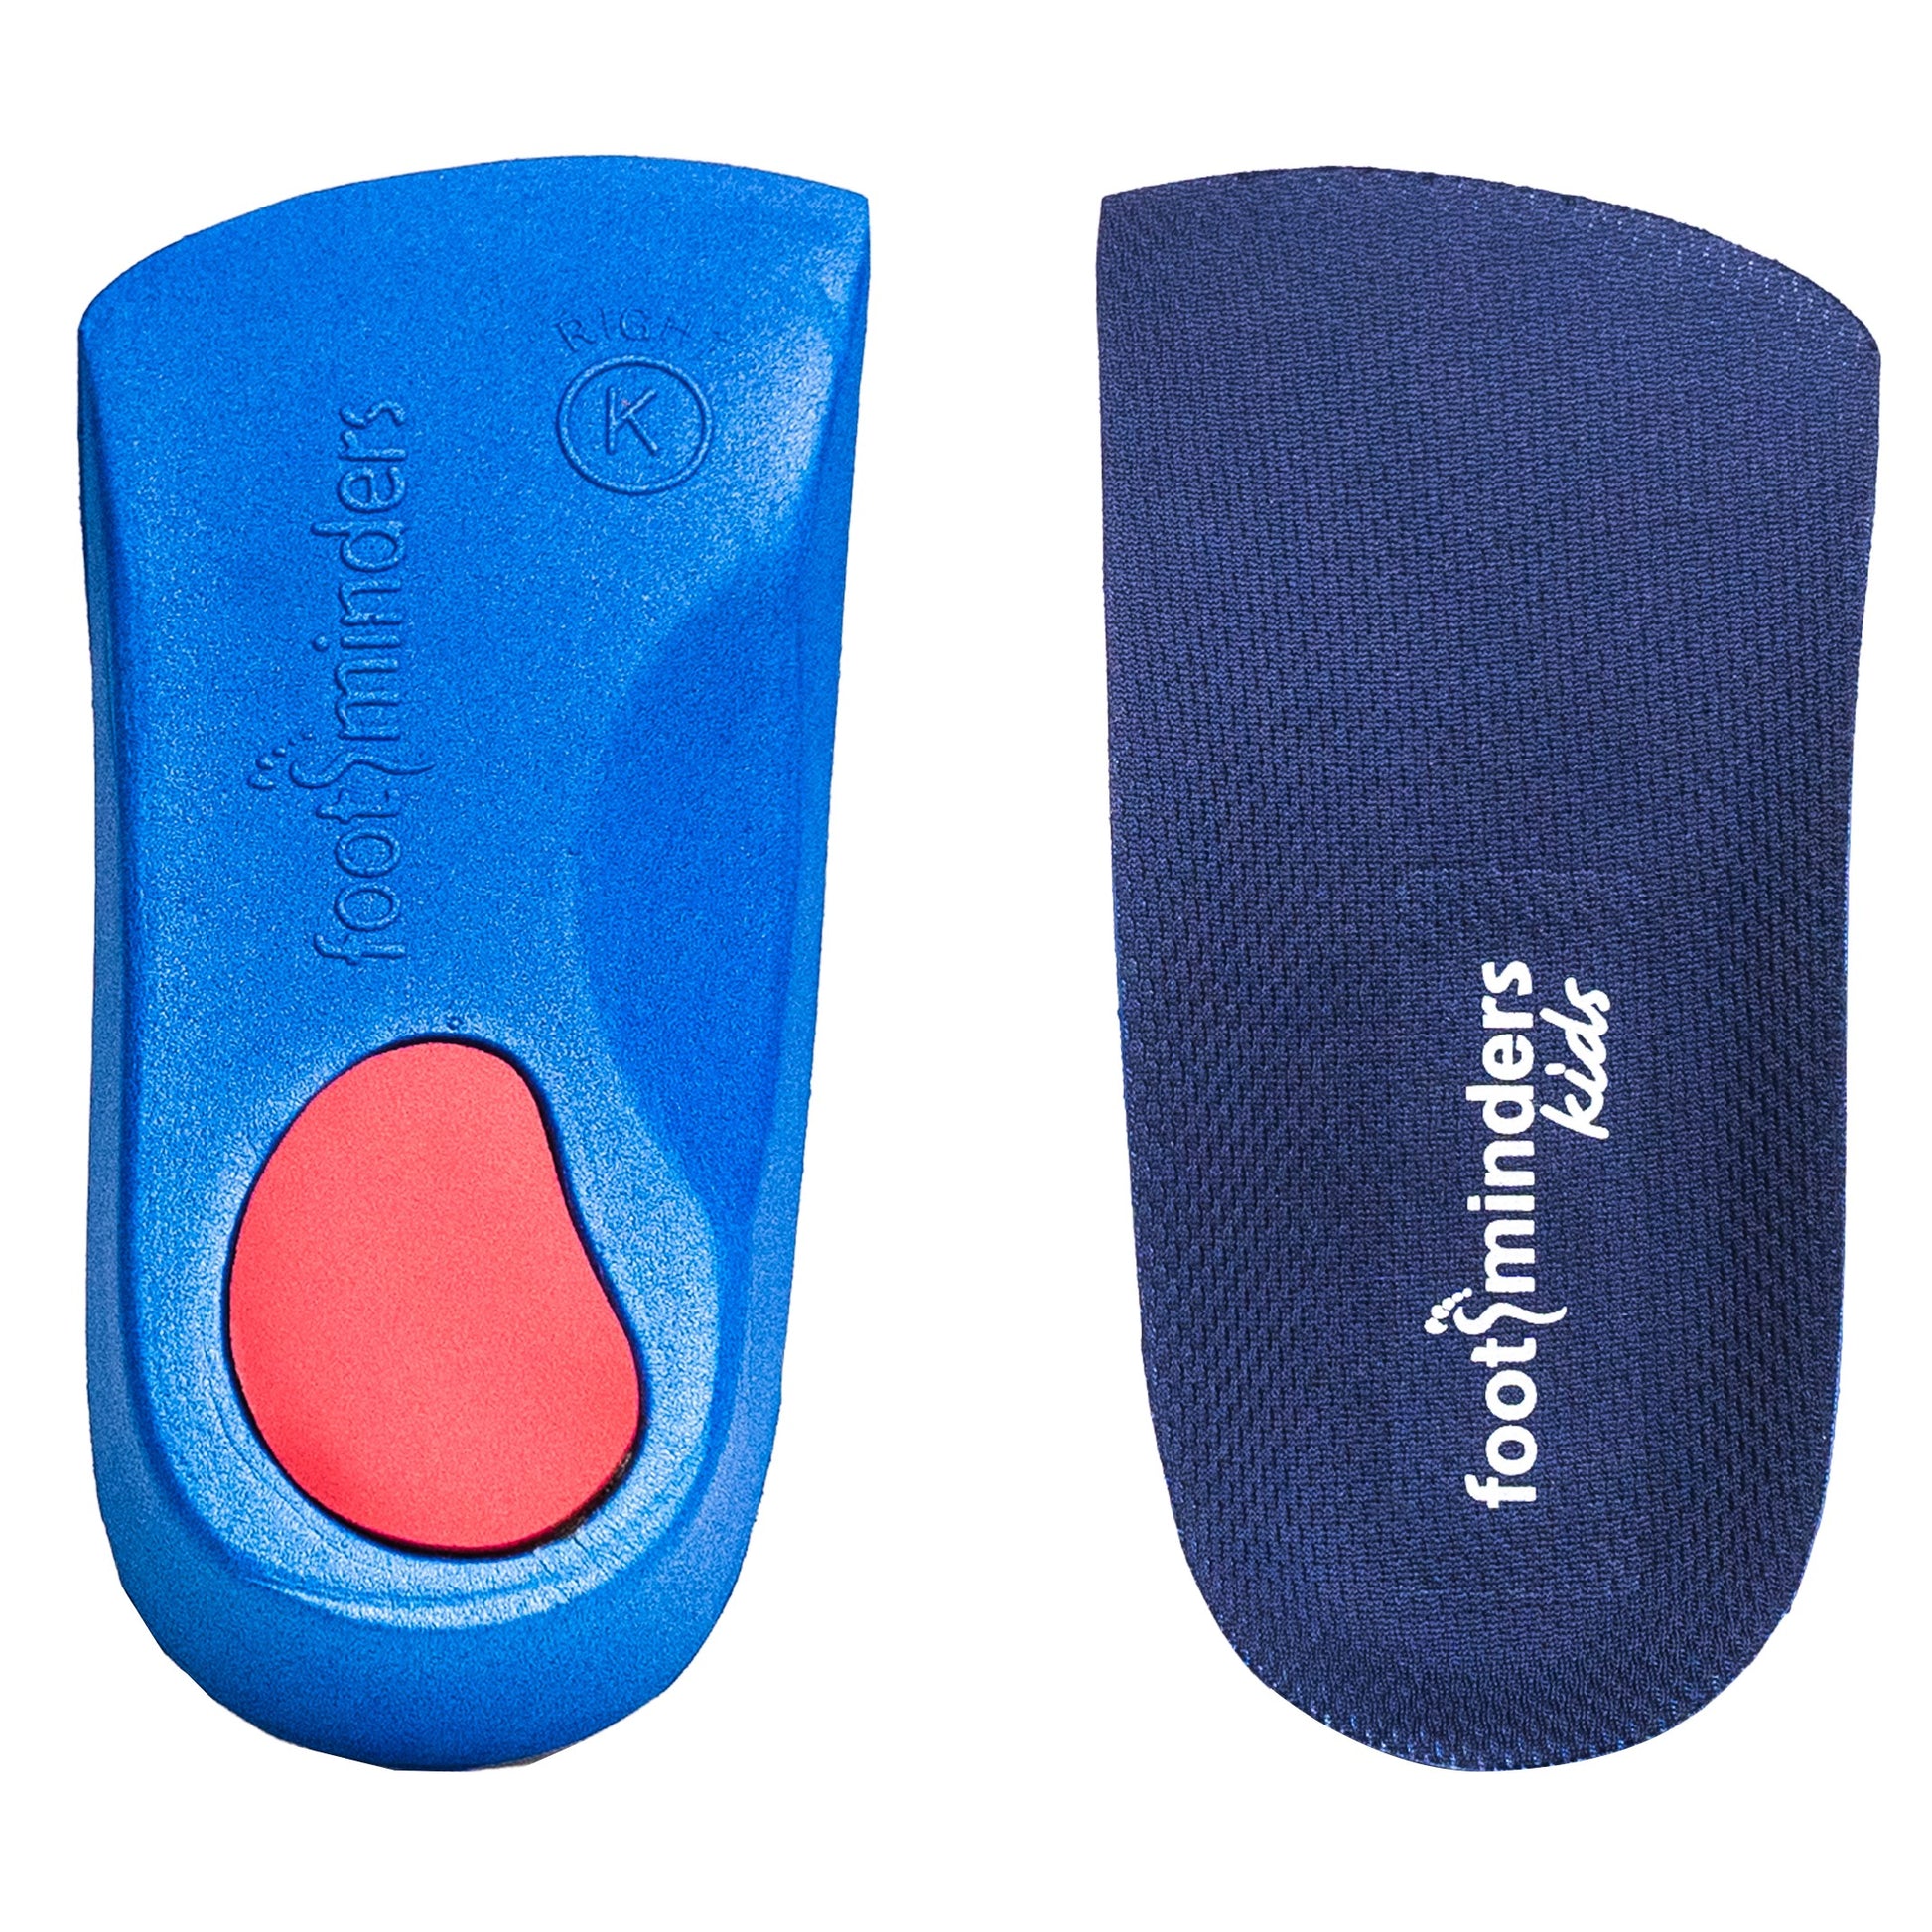 Orthotic arch support insoles for children (Pair)